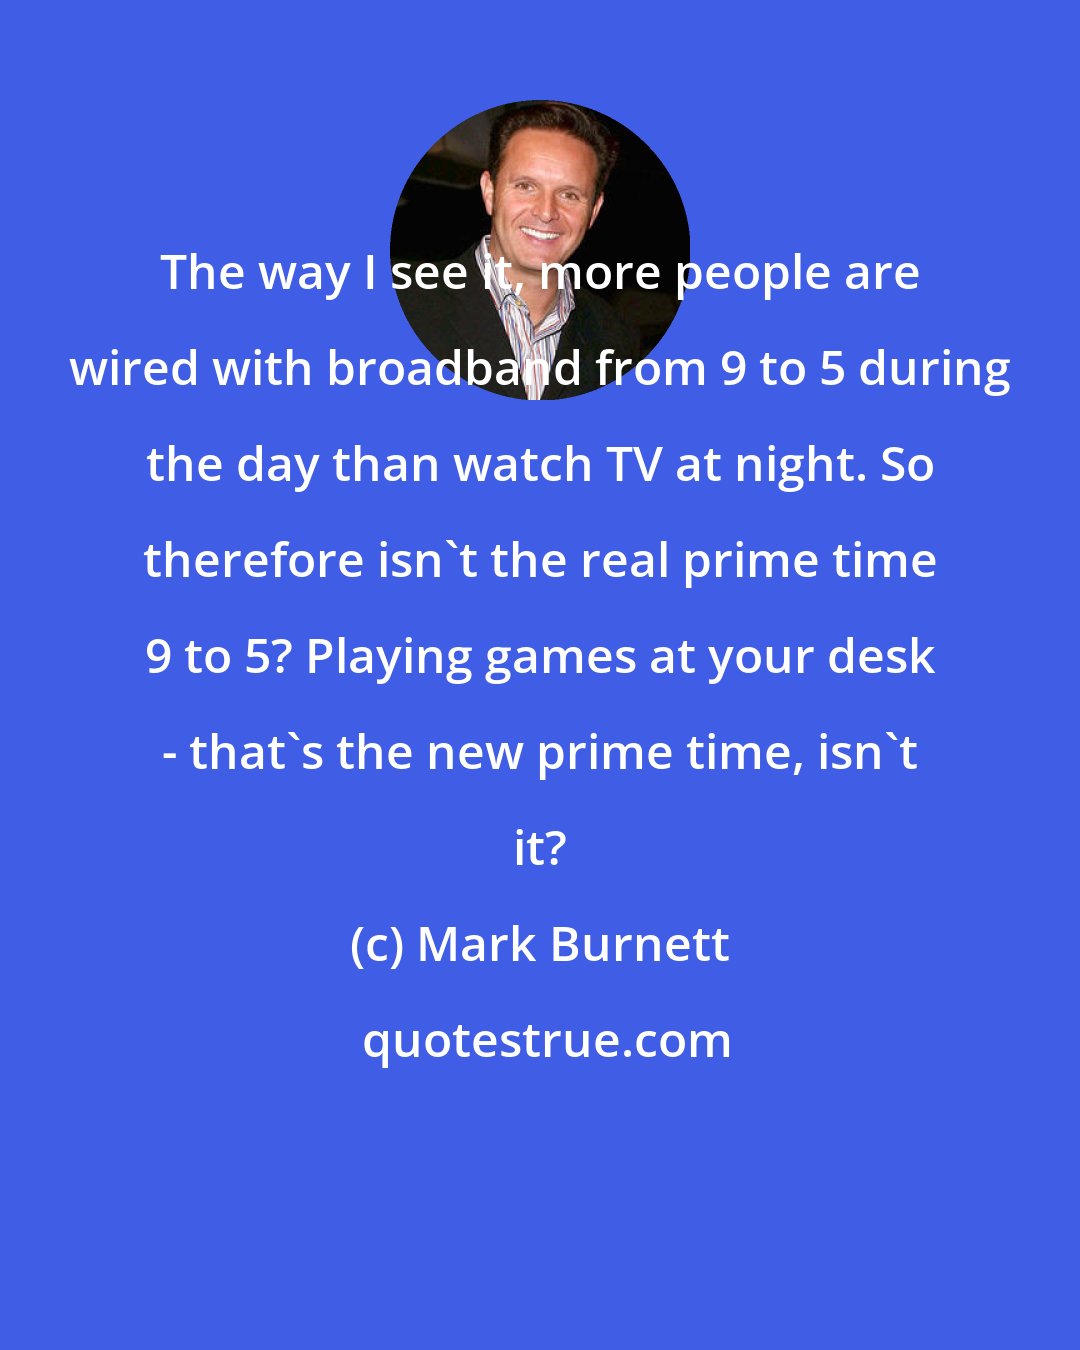 Mark Burnett: The way I see it, more people are wired with broadband from 9 to 5 during the day than watch TV at night. So therefore isn't the real prime time 9 to 5? Playing games at your desk - that's the new prime time, isn't it?